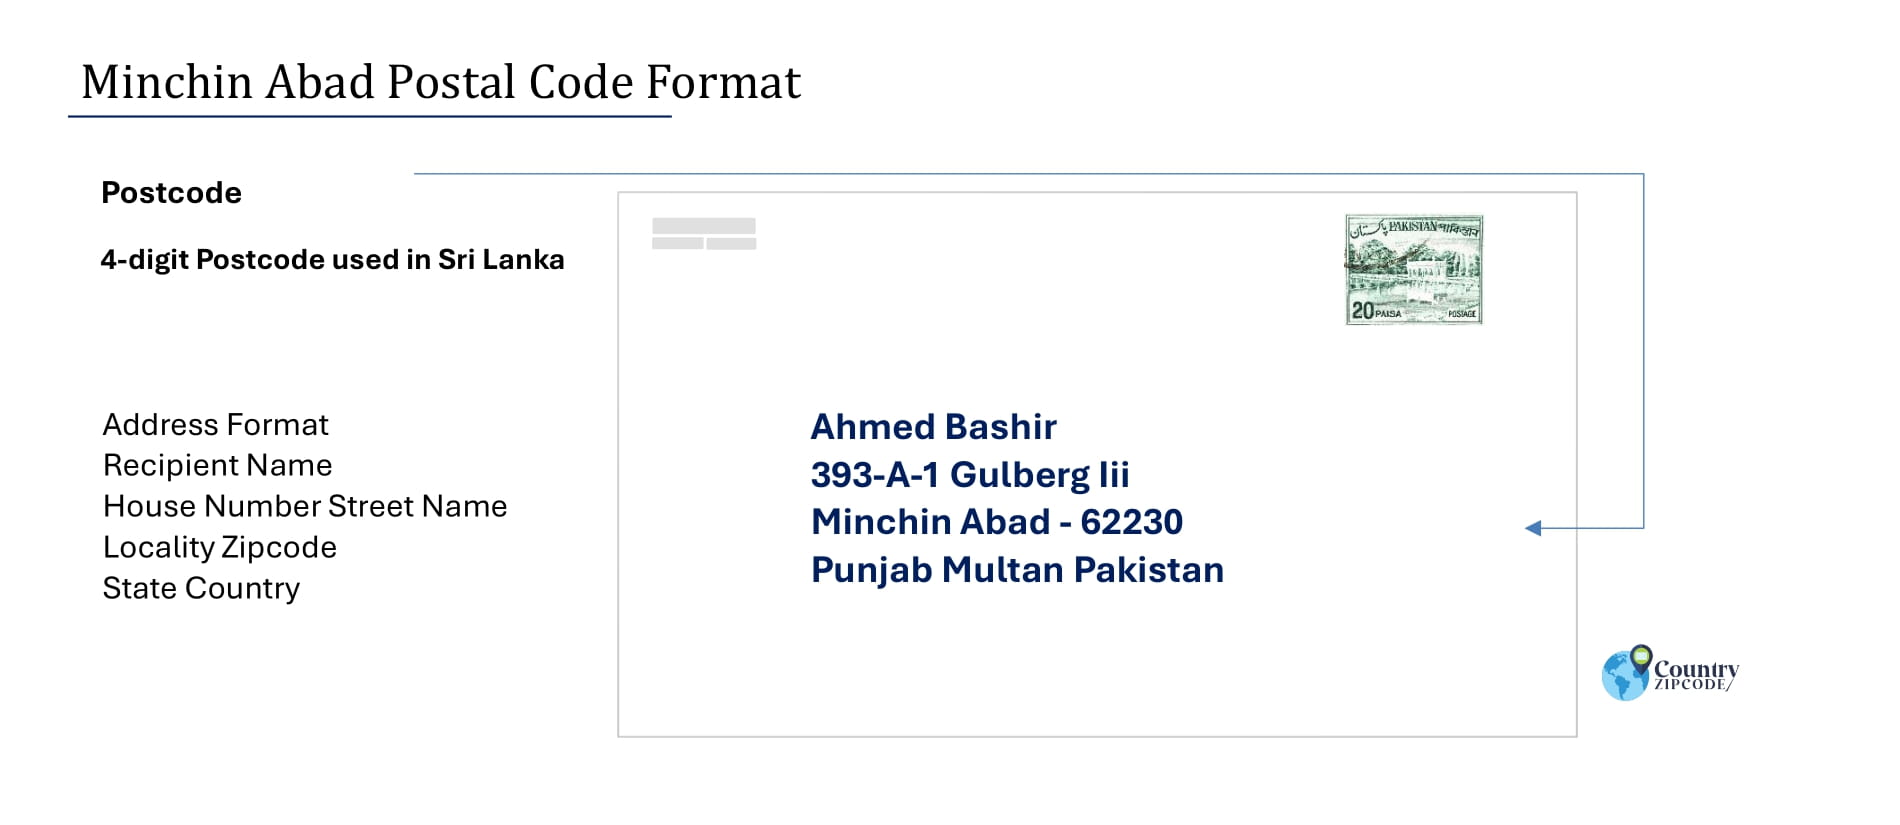 Example of Minchin Abad Pakistan Postal code and Address format